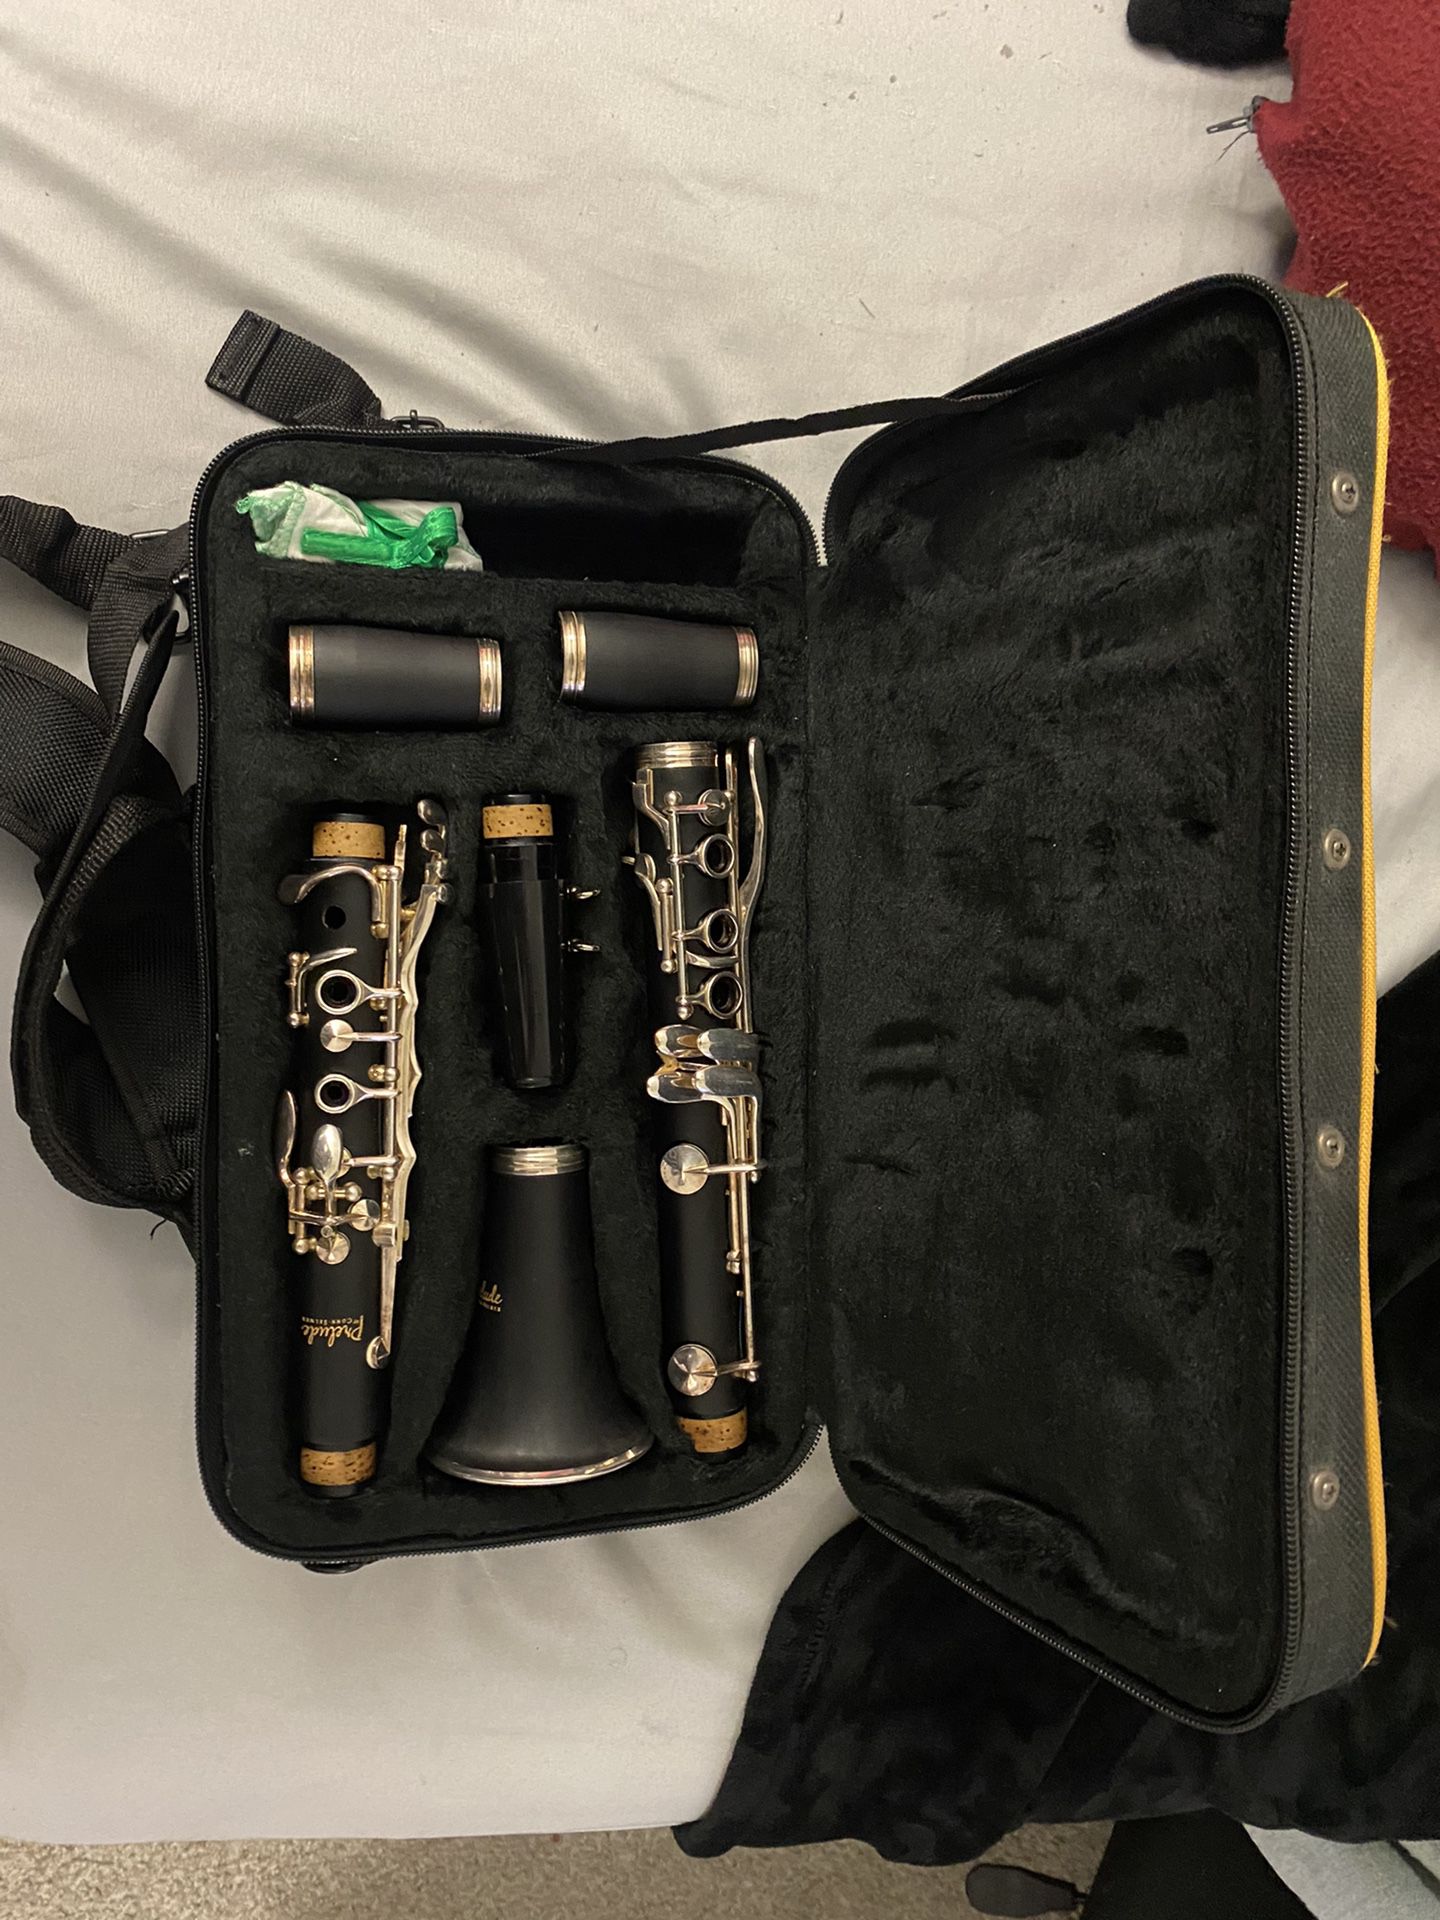 Prelude Clarinet by Conn Selmer